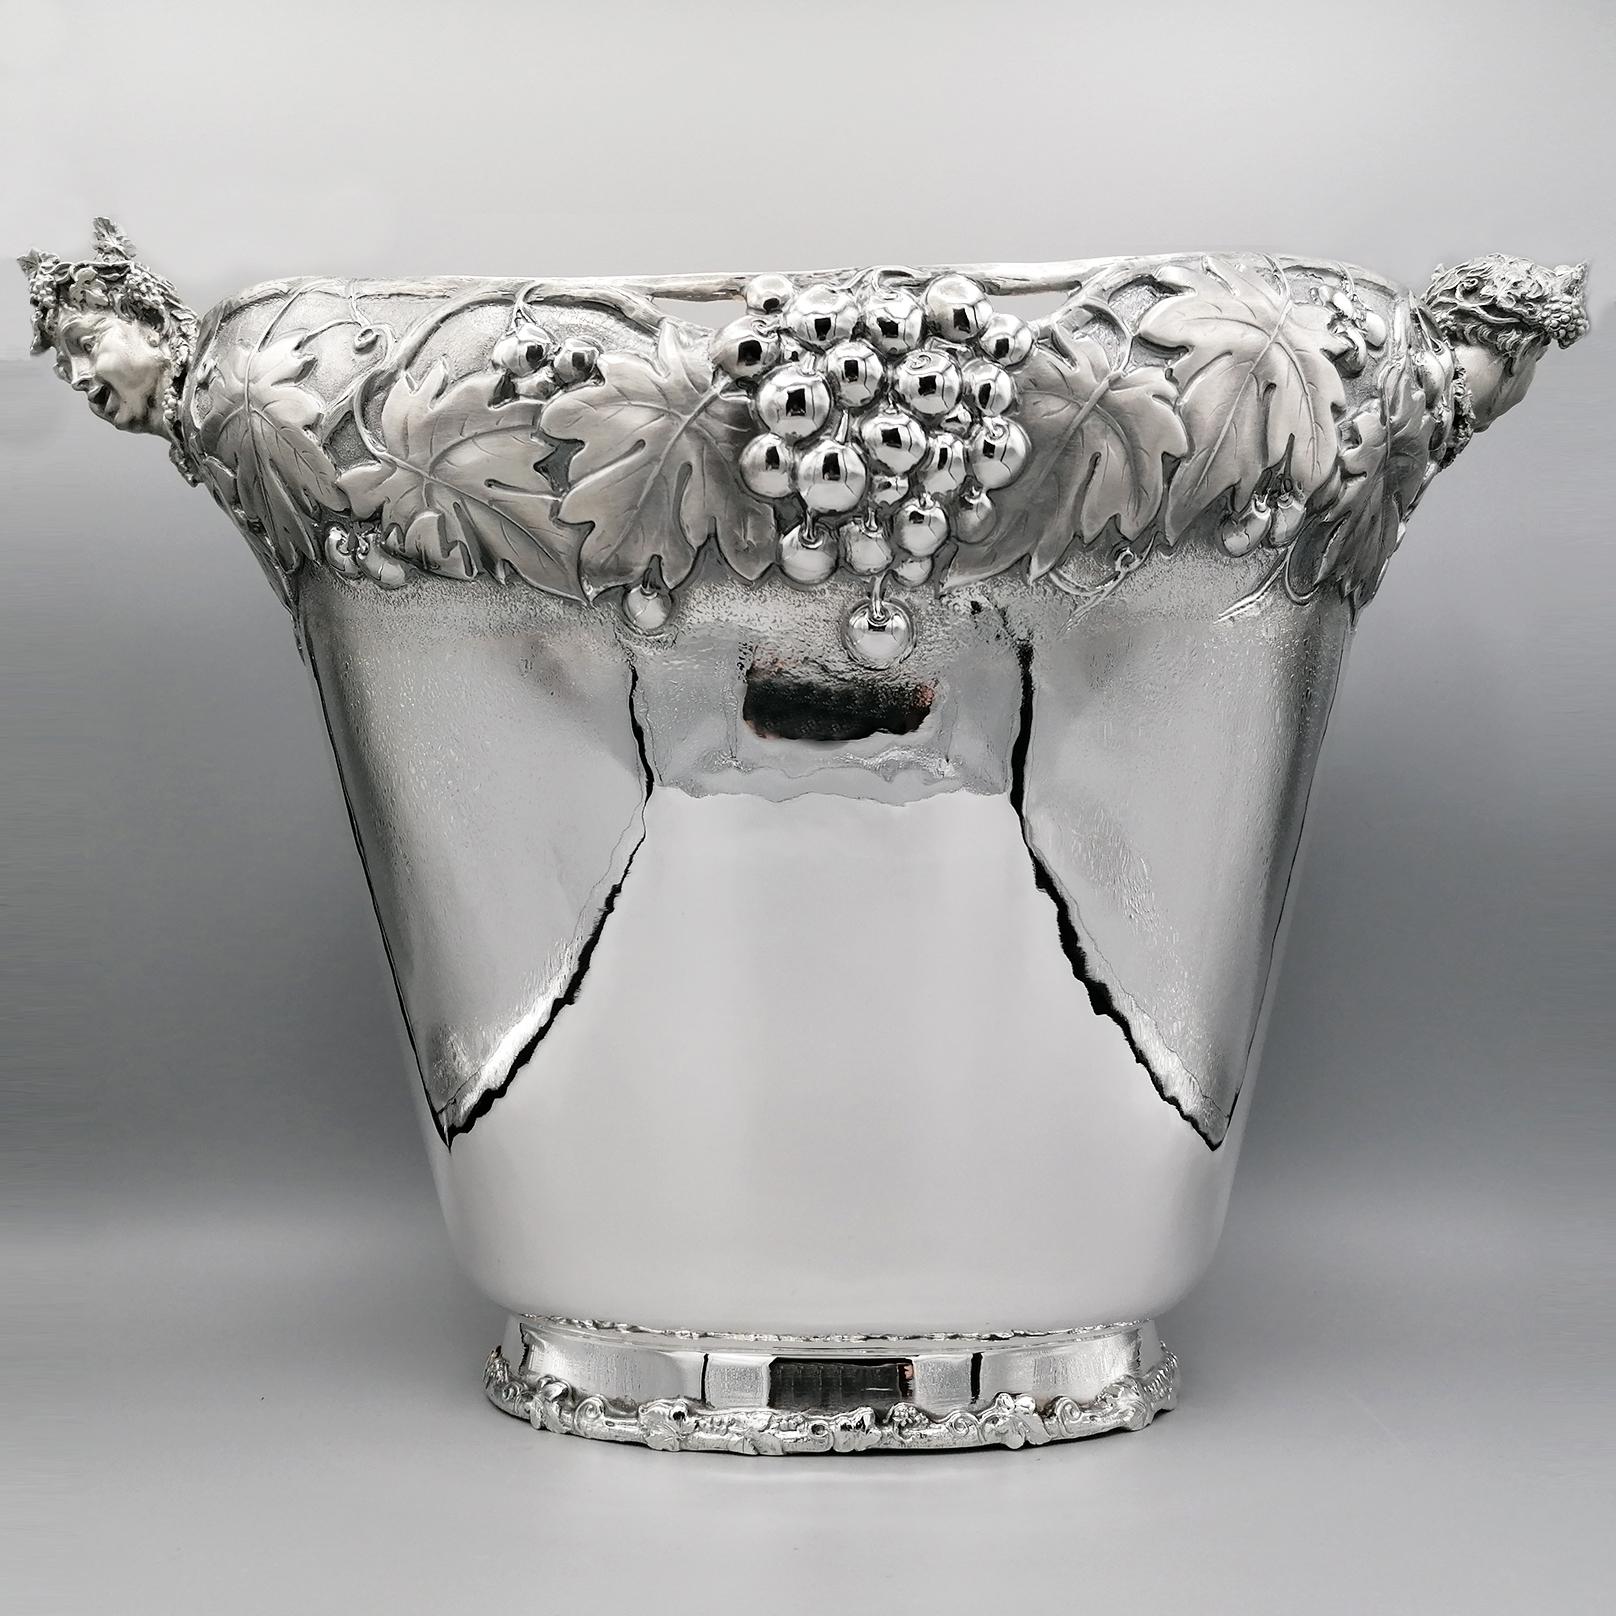 Large champagne bucket in 800 solid silver.
Completely handmade, it was made by hammering a silver plate and giving it the shape of a 2-seater champagne bucket,
The upper barrel was then later embossed, symmetrically reproducing bunches, shoots and